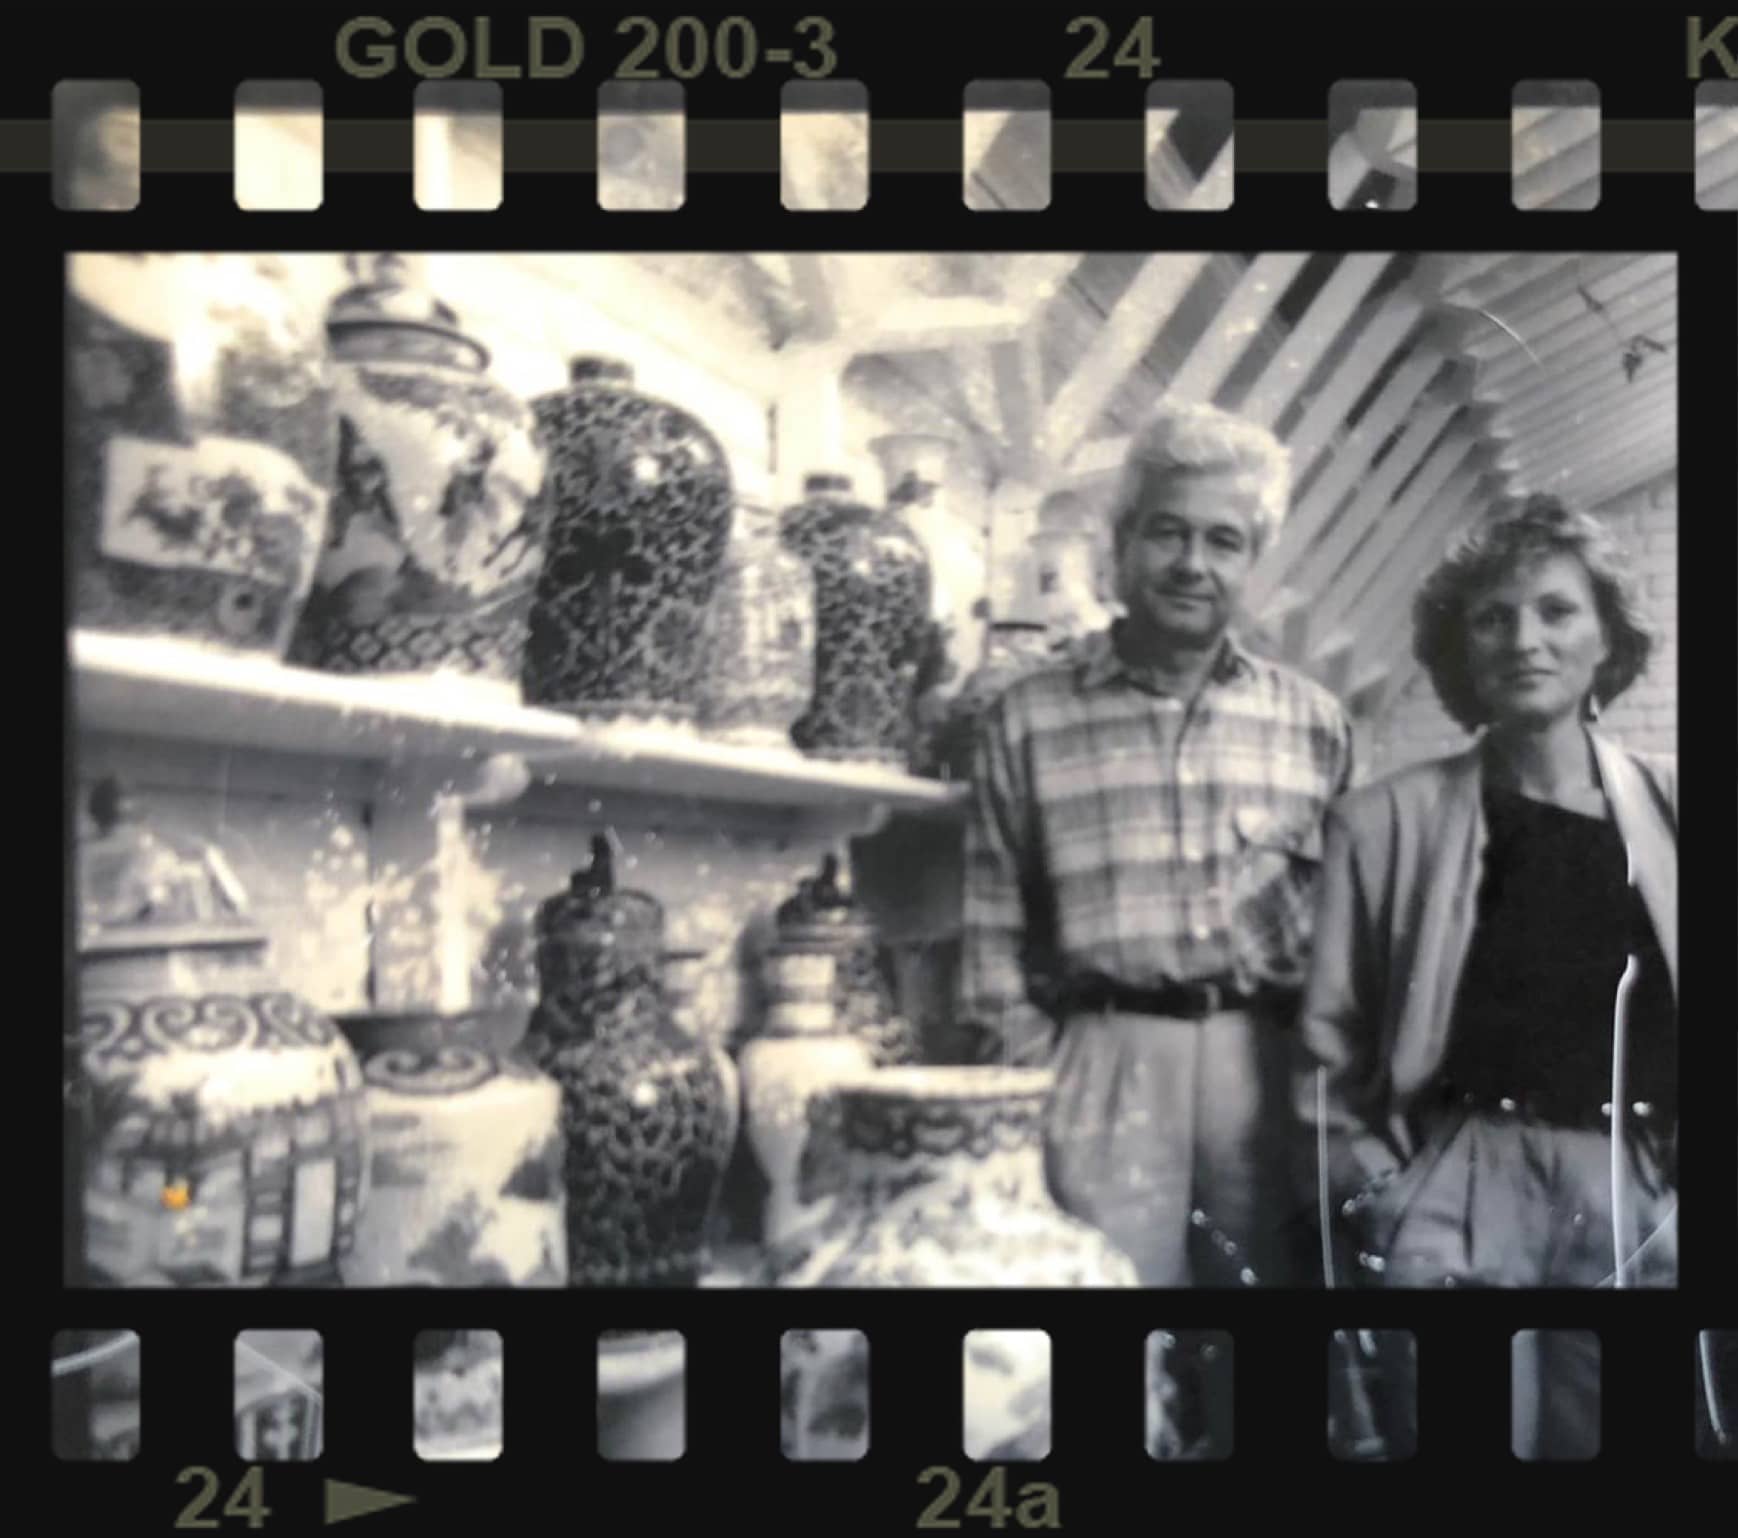 Antiques online- In 1973 Kevin Page and Maureen work to expand the business